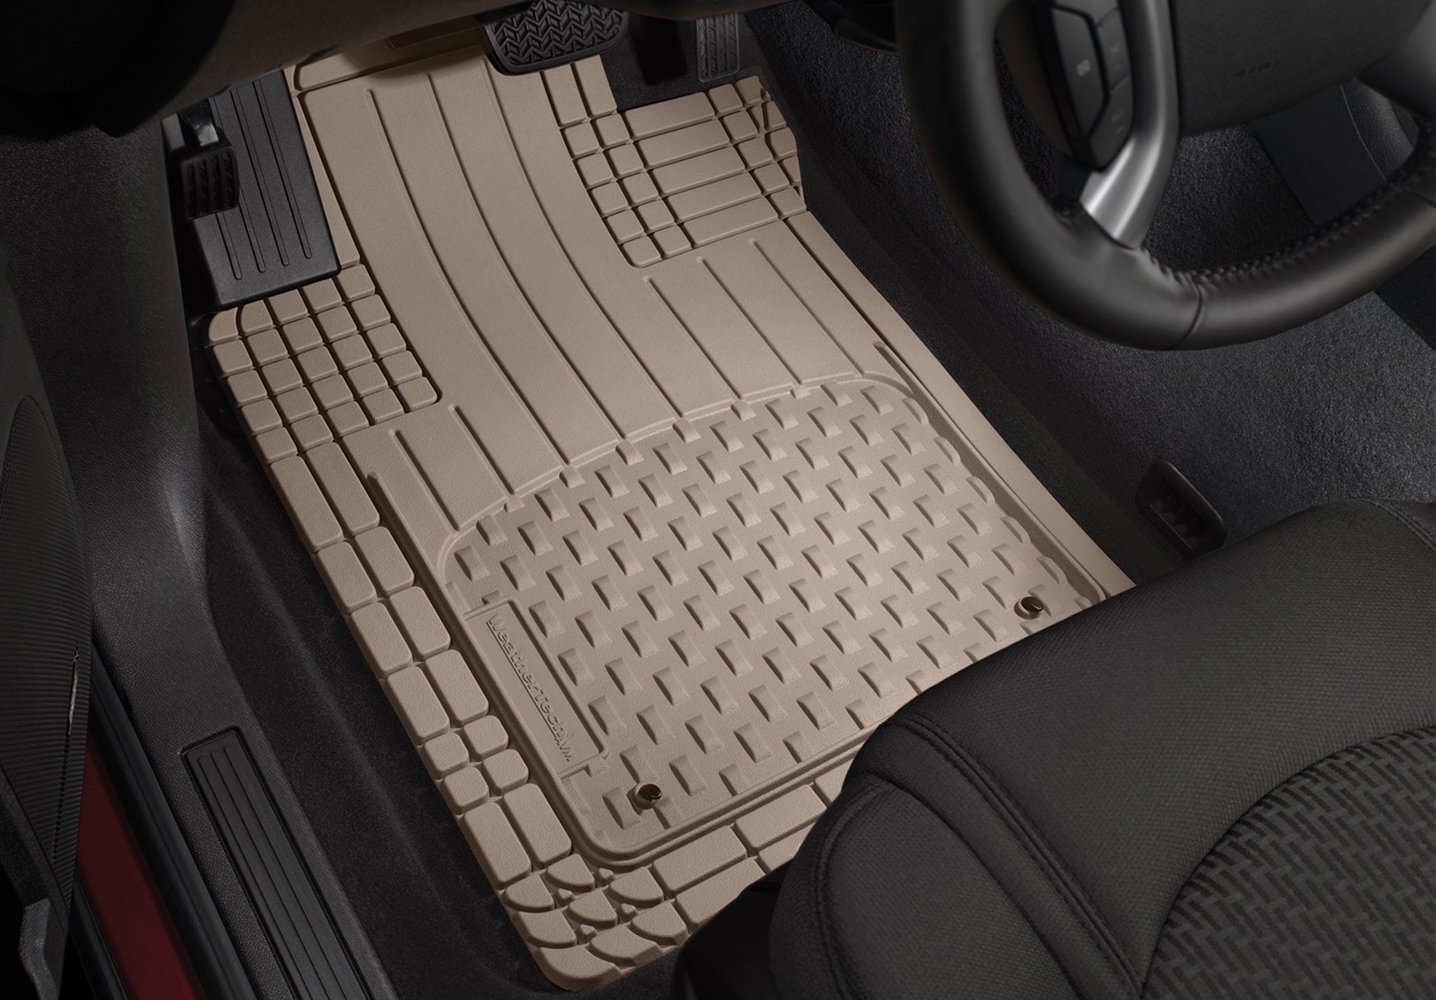 WeatherTech Floor Mats and Coverking Seat Covers